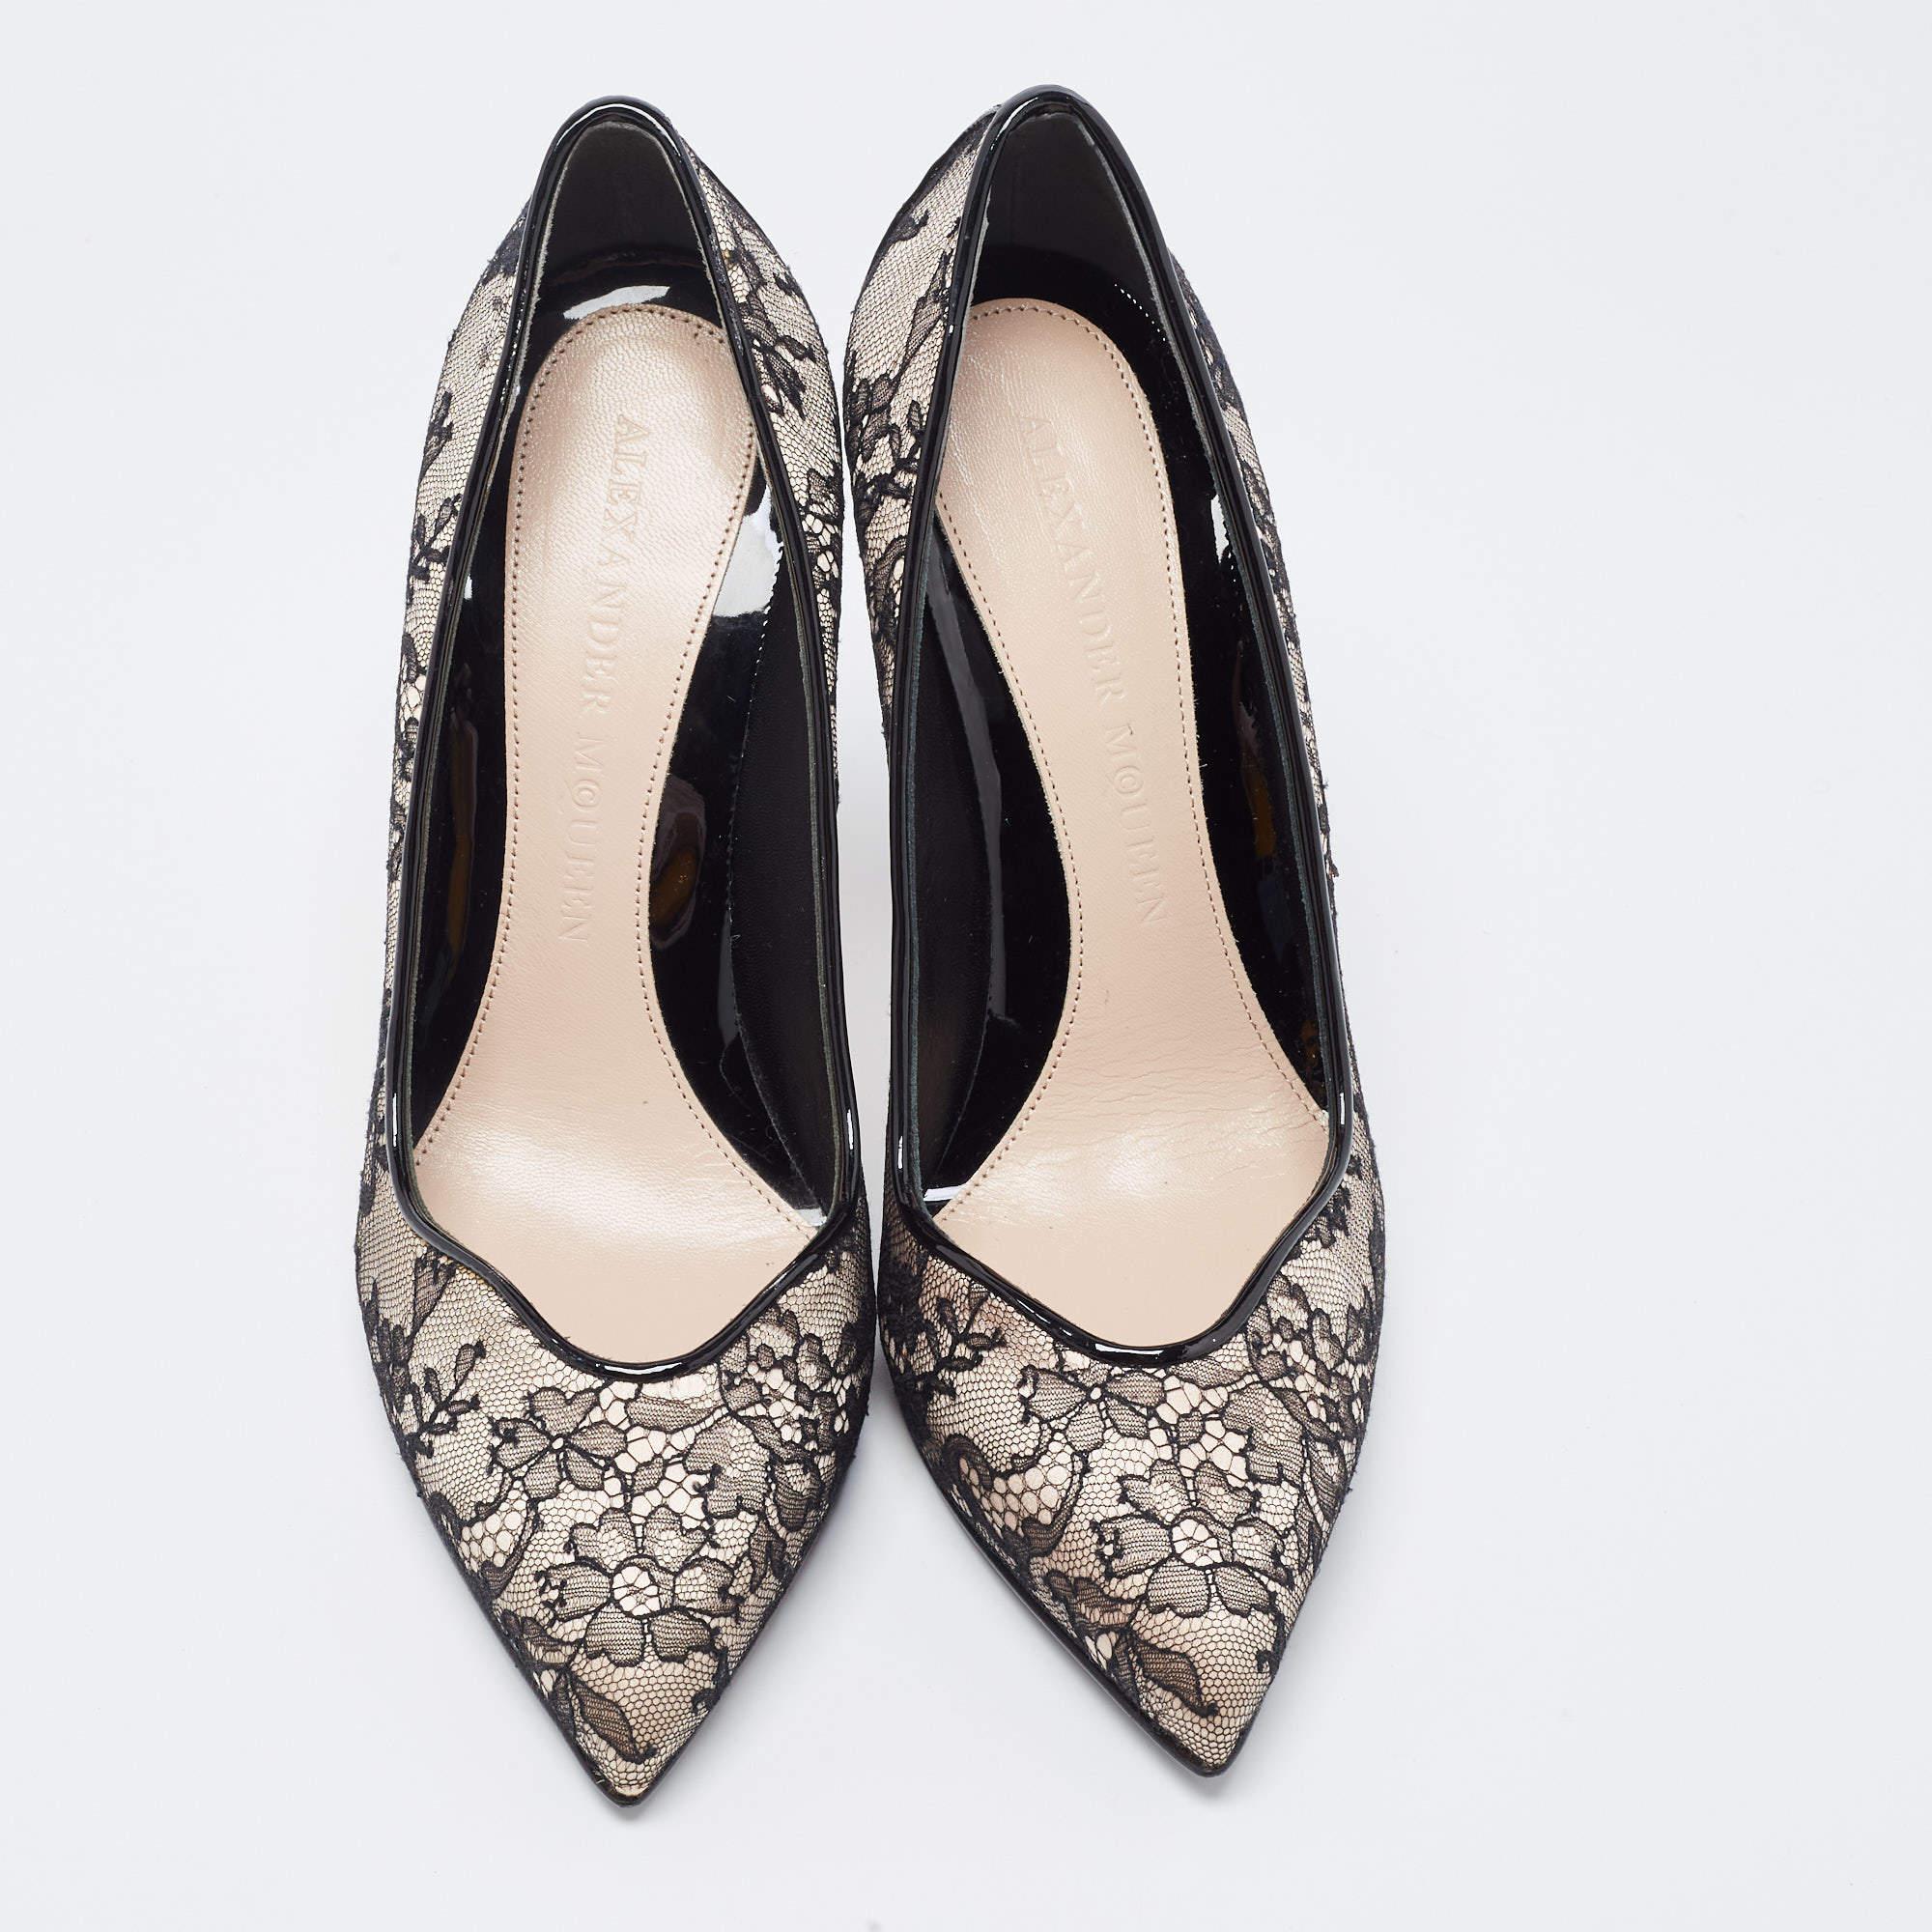 Women's Alexander McQueen Black Lace and Patent Leather Pumps 